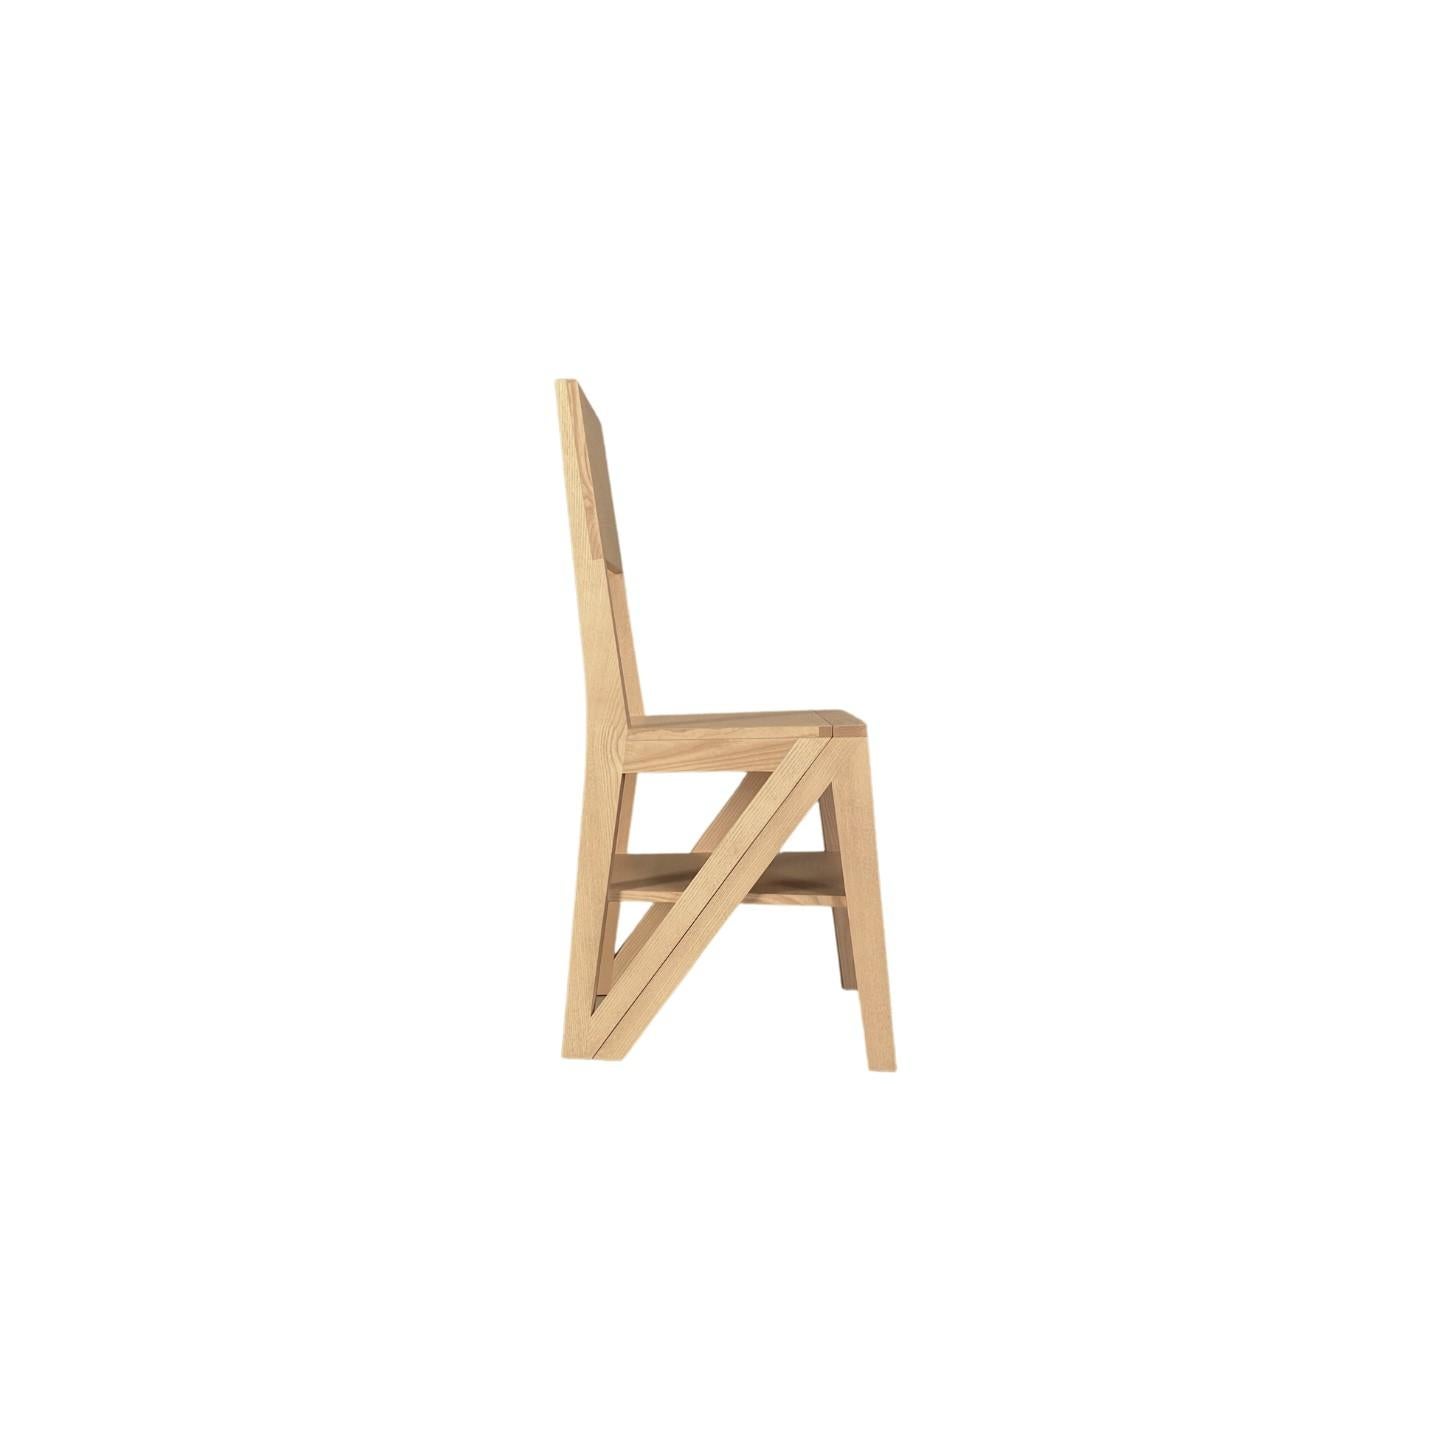 The Scala is an original chair made of ashwood. Thanks to its solid frame the Scala easily turns into a handy stepladder. The simple and clean lines, allow you to use the Scala in any home space; not only in the living room but also in the